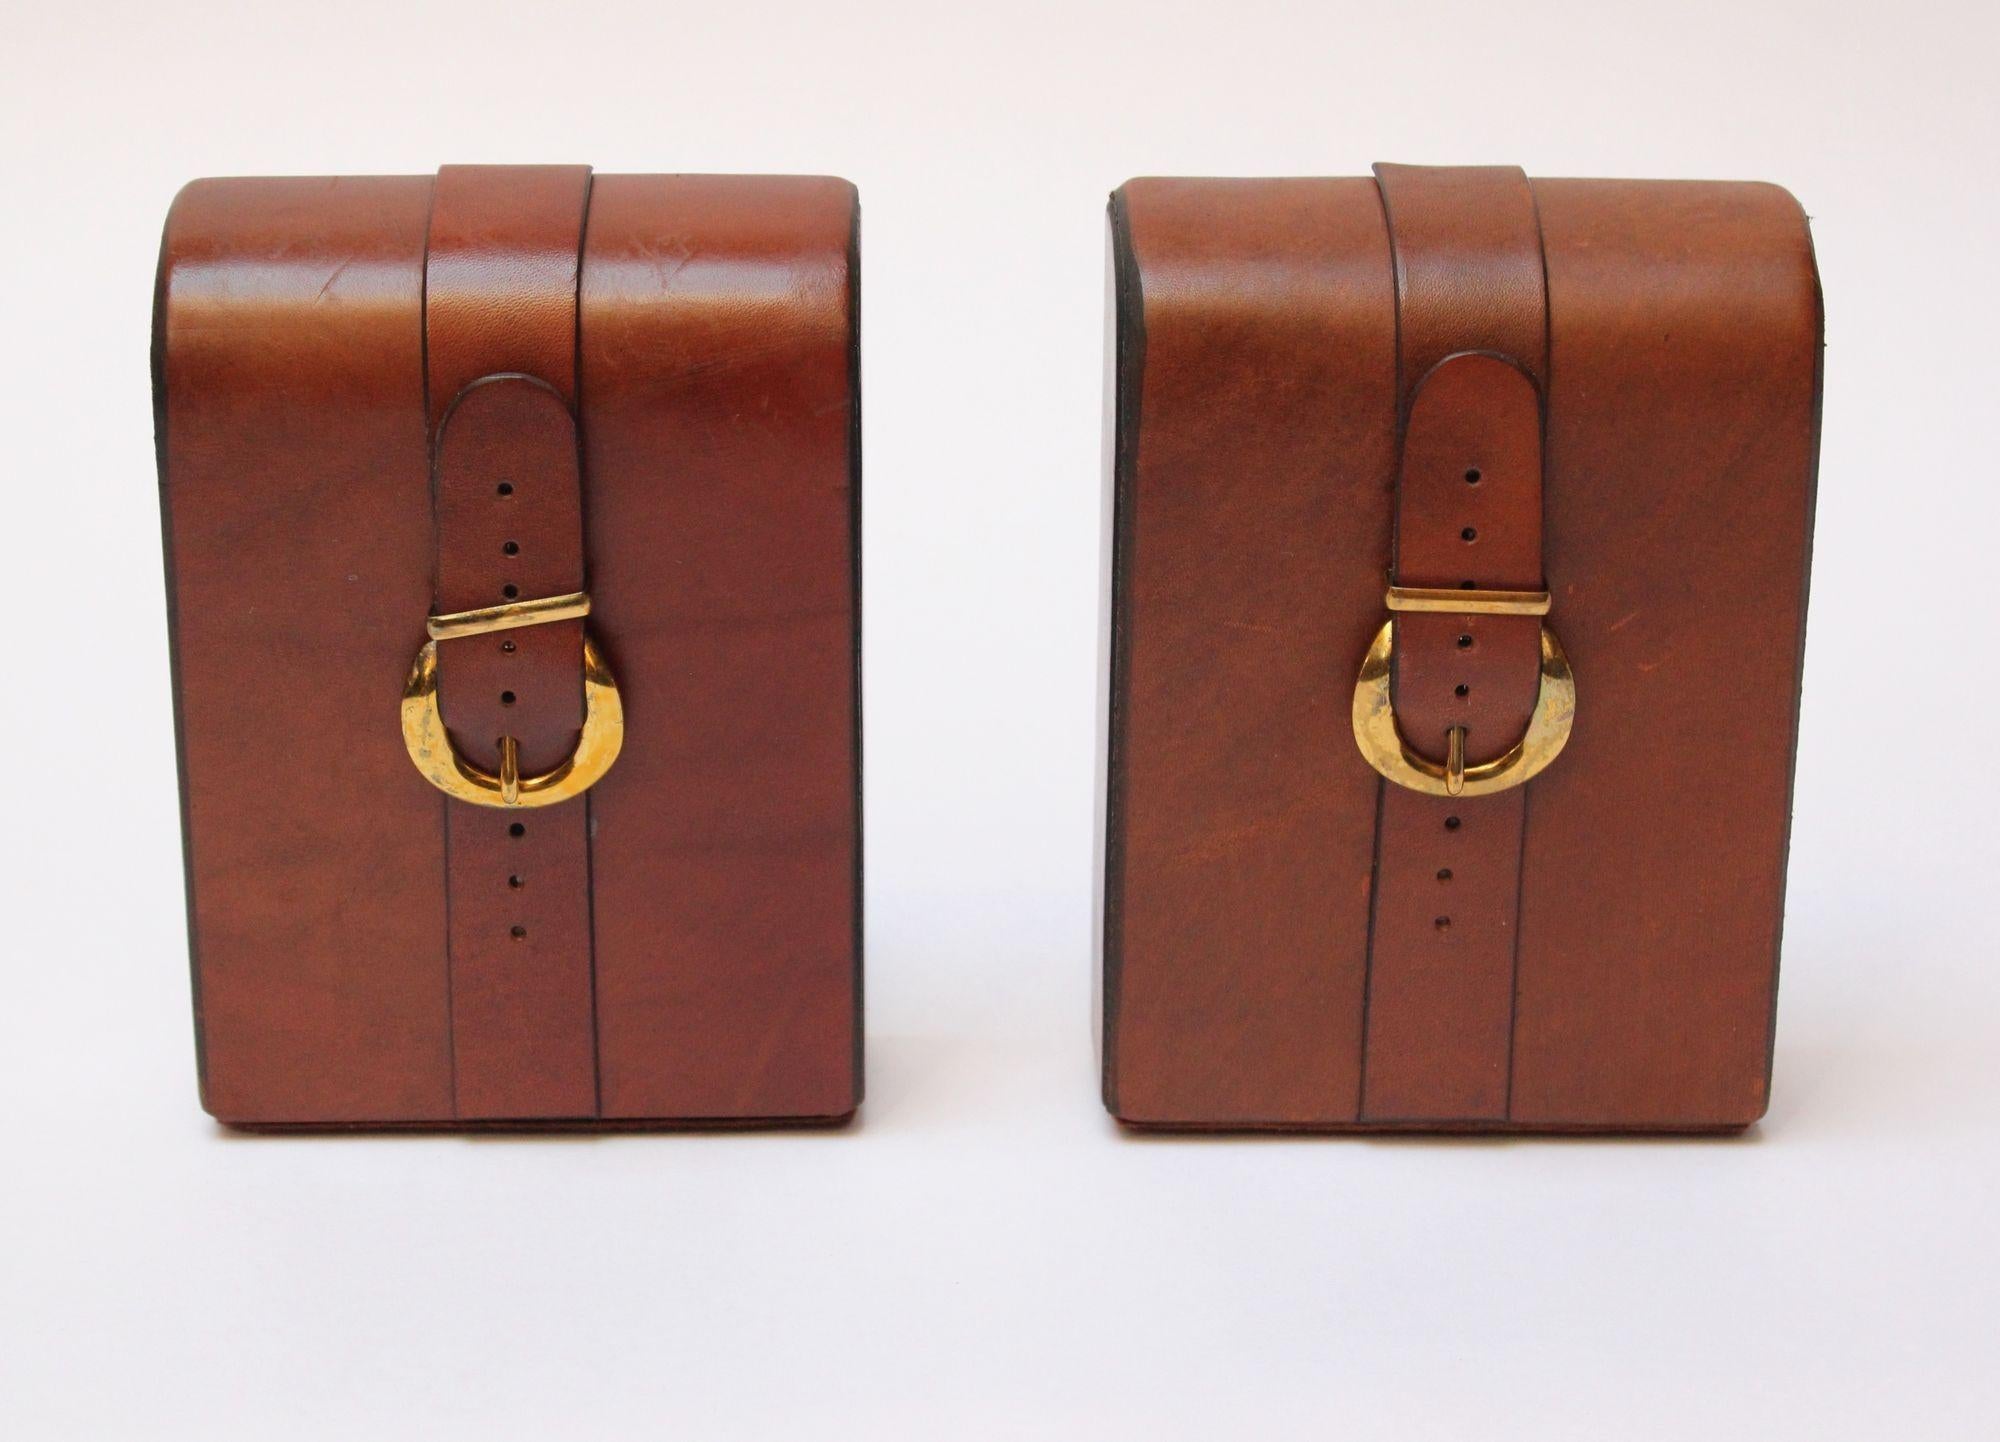 Handsome saddle leather bookends with strap and brass buckle details and felted bases. Warm patina/light scuffs present consistent with age/use.
Measures: H: 6.63